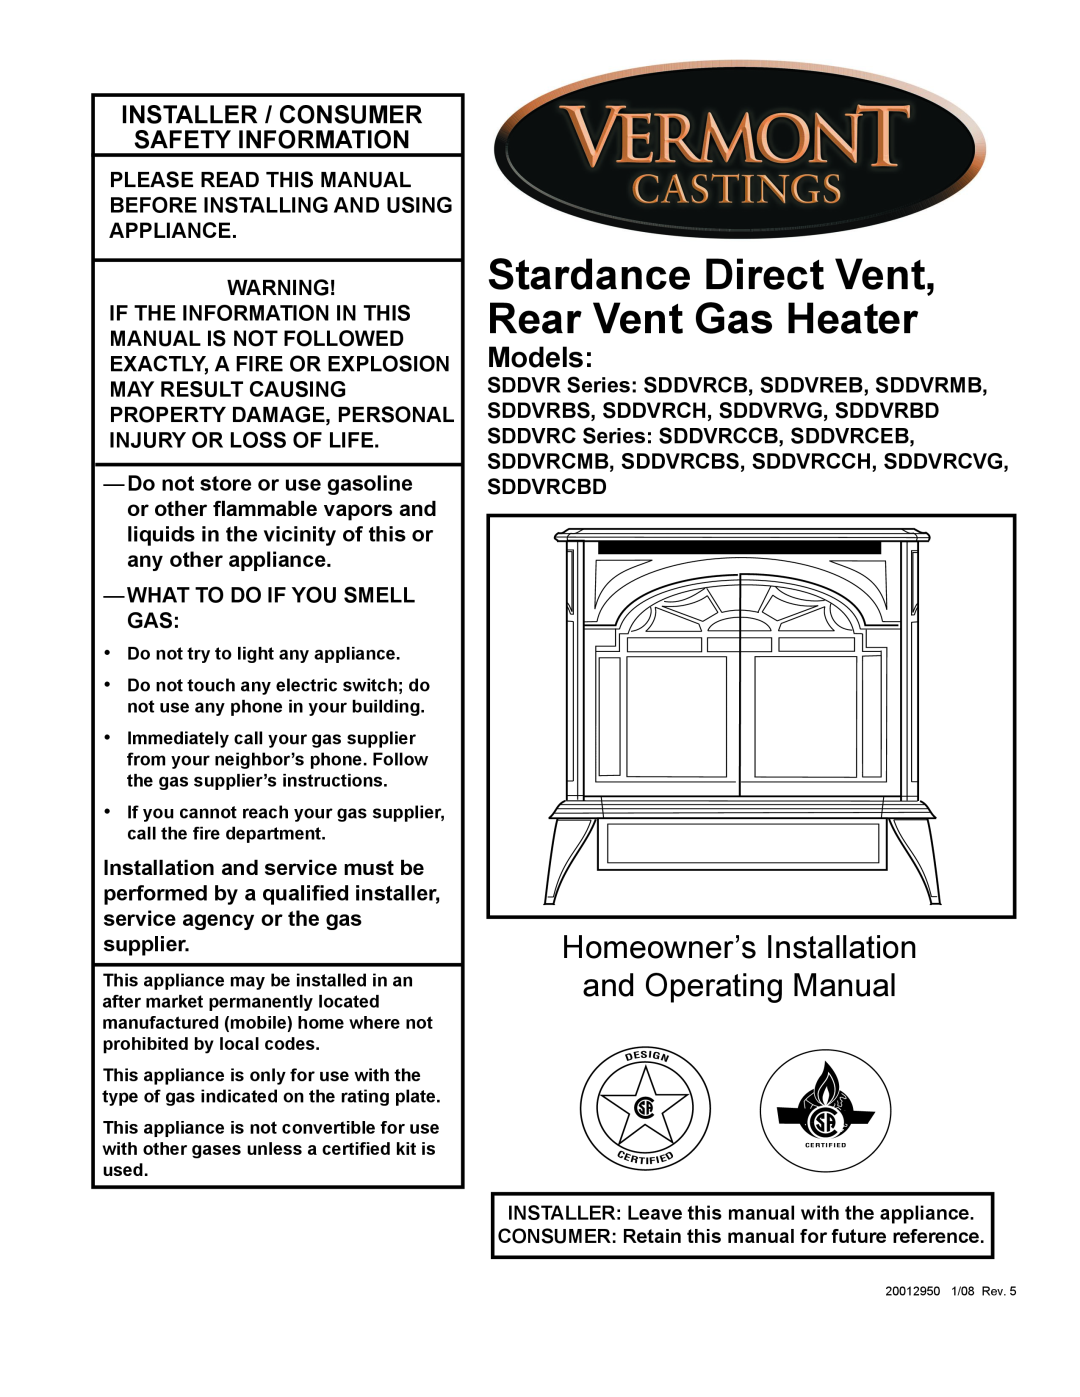 Vermont Casting SDDVRCB manual Please Read This Manual Before Installing And Using Appliance, What To Do If You Smell Gas 